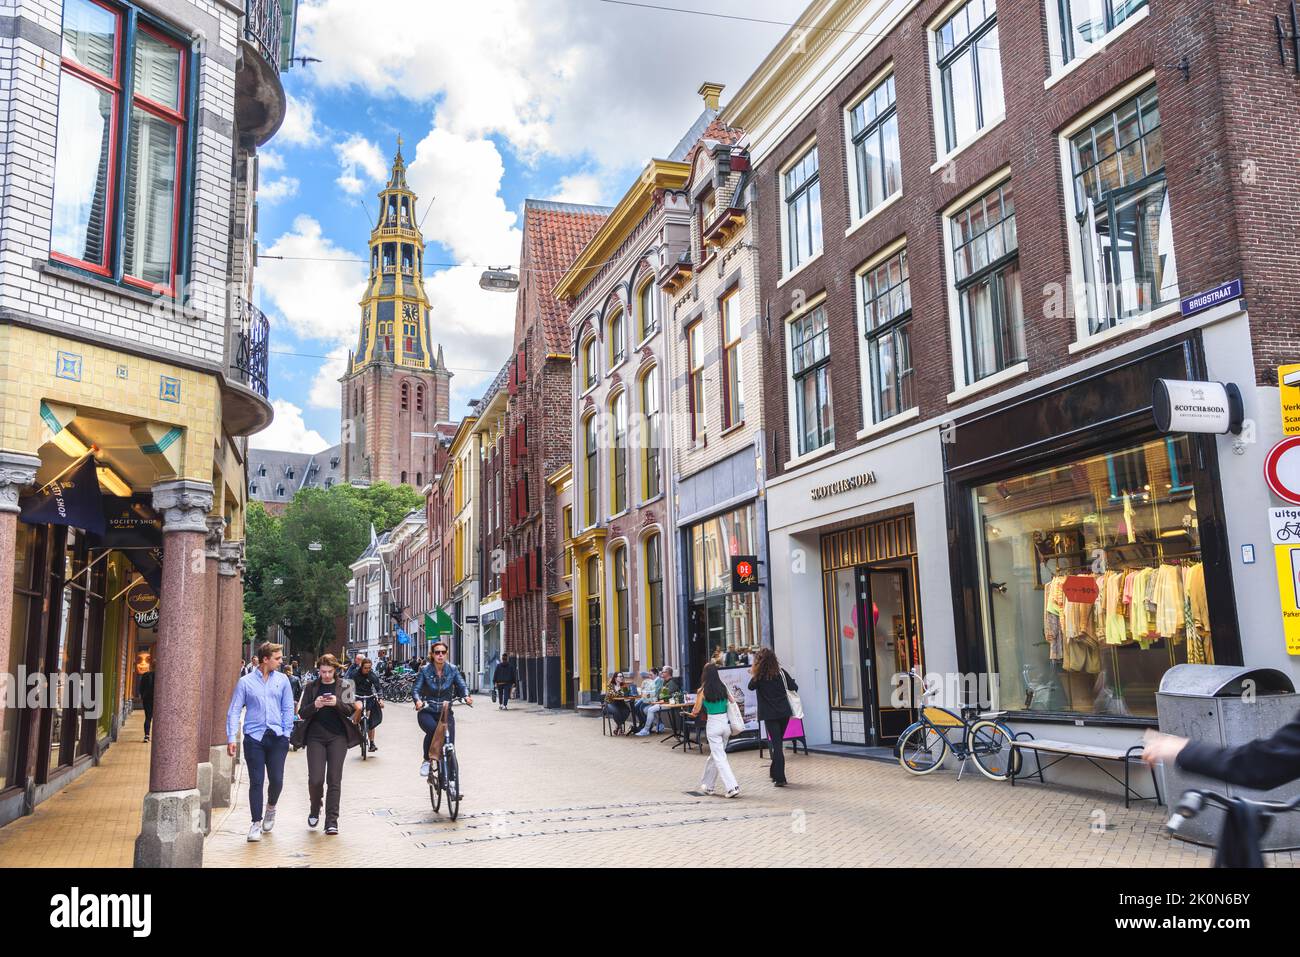 Groningen, The Netherlands - June 20, 2022: View of Brugstraat lined with historic buildings in the old city centre Stock Photo